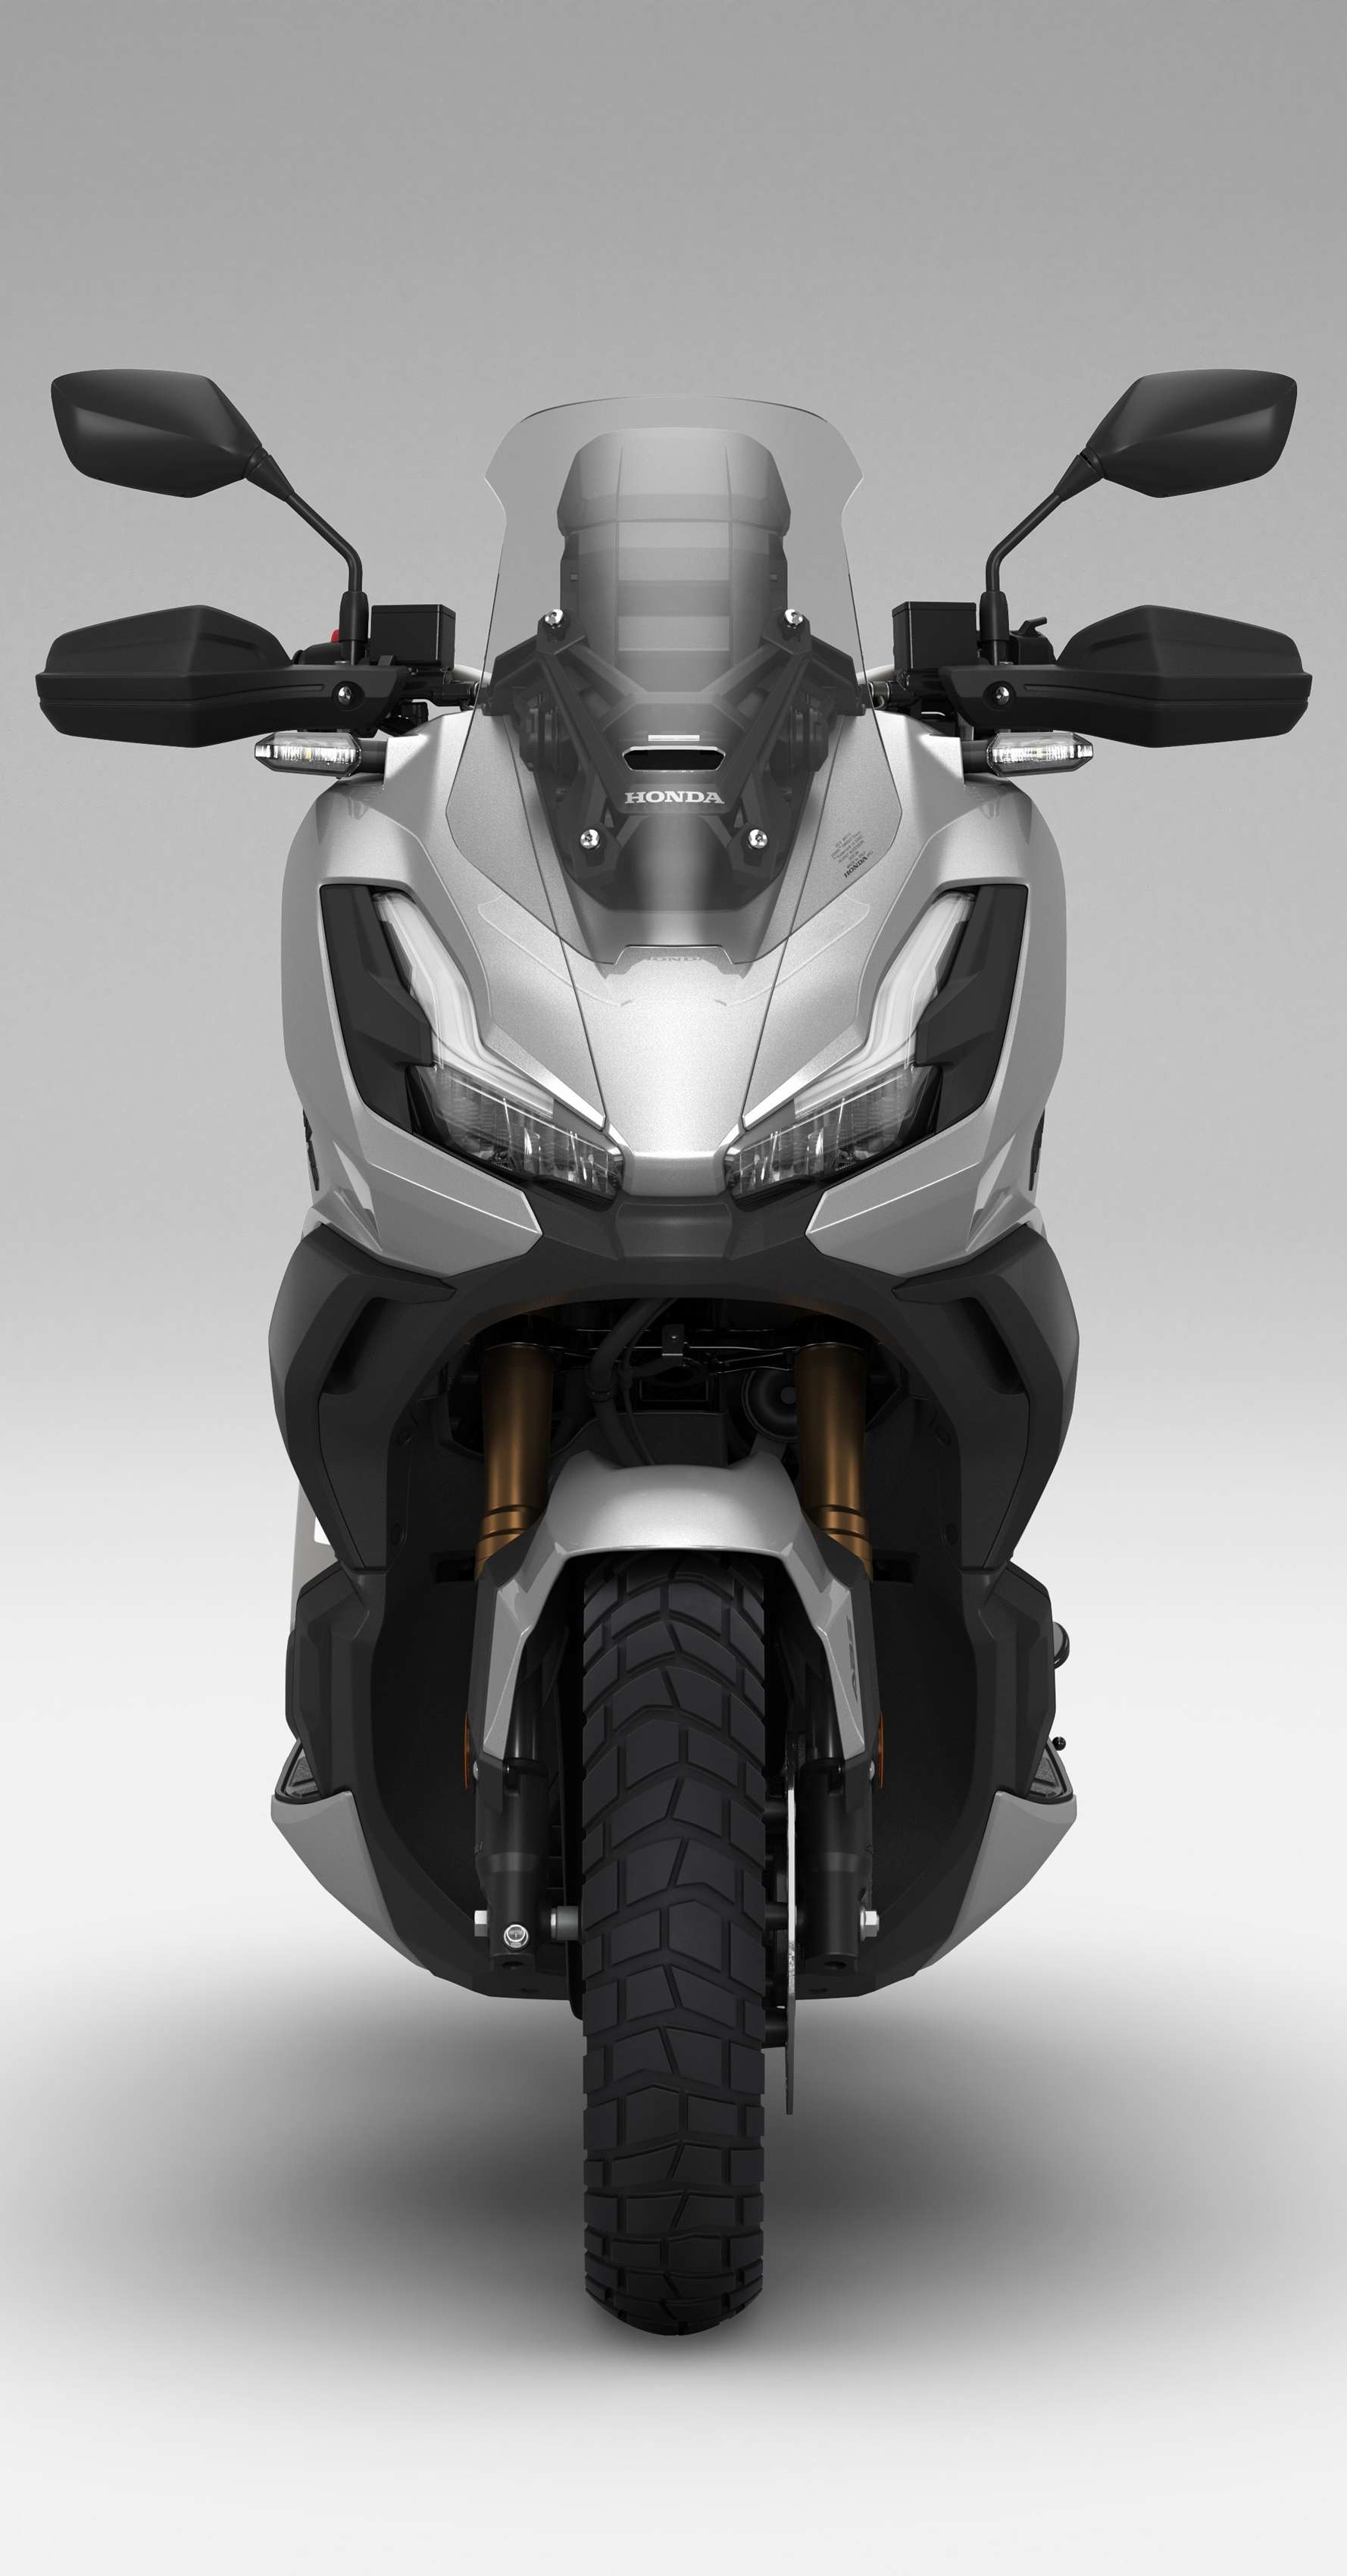 EICMA 2021: Honda ADV350 - 330 cc adventure-styled scooter with app-based  Smartphone Voice Control 